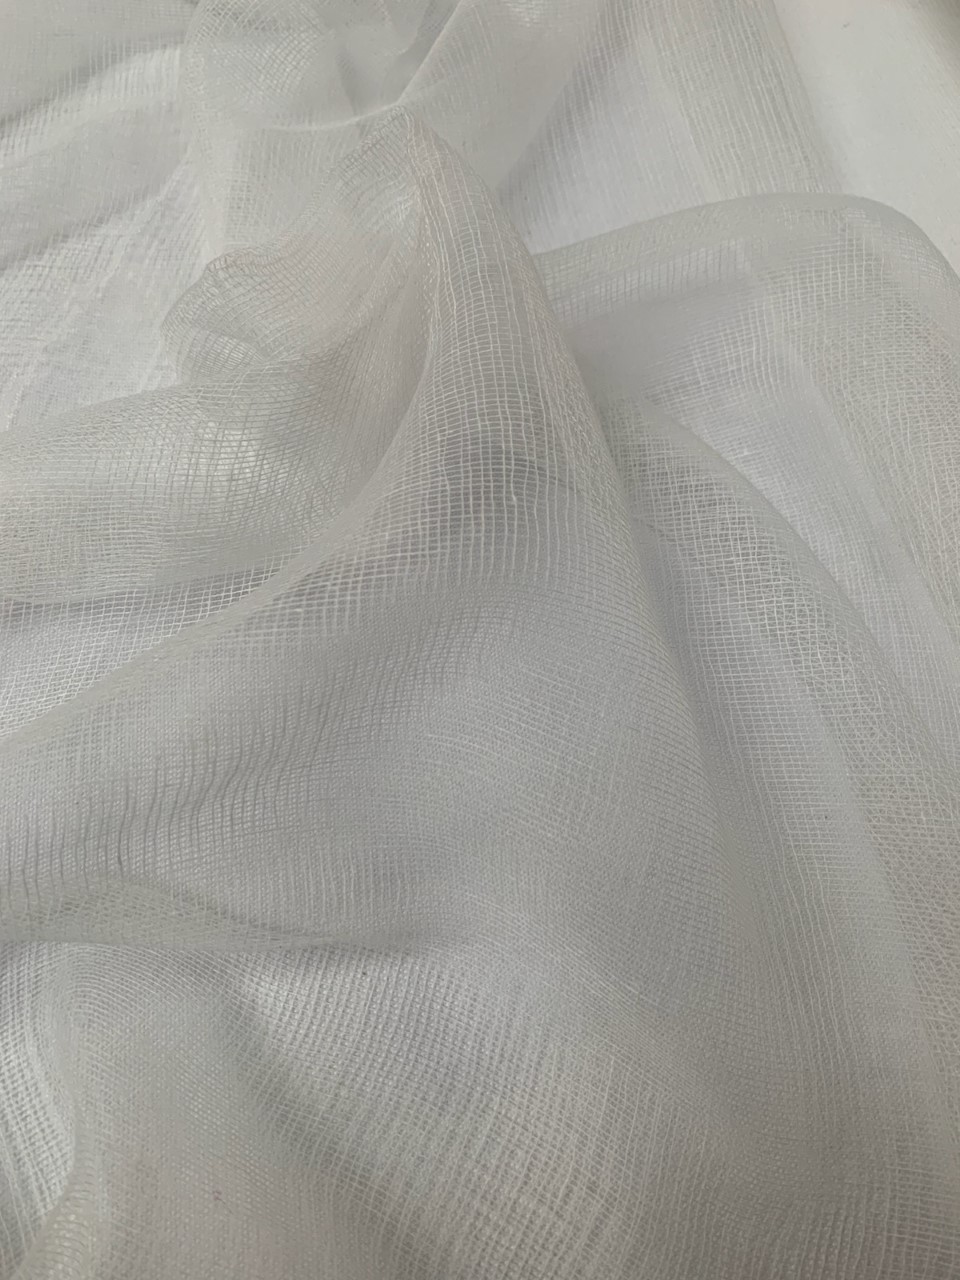 30" Wide Grade 10 White Cheesecloth - 1000 Yard Roll - Click Image to Close